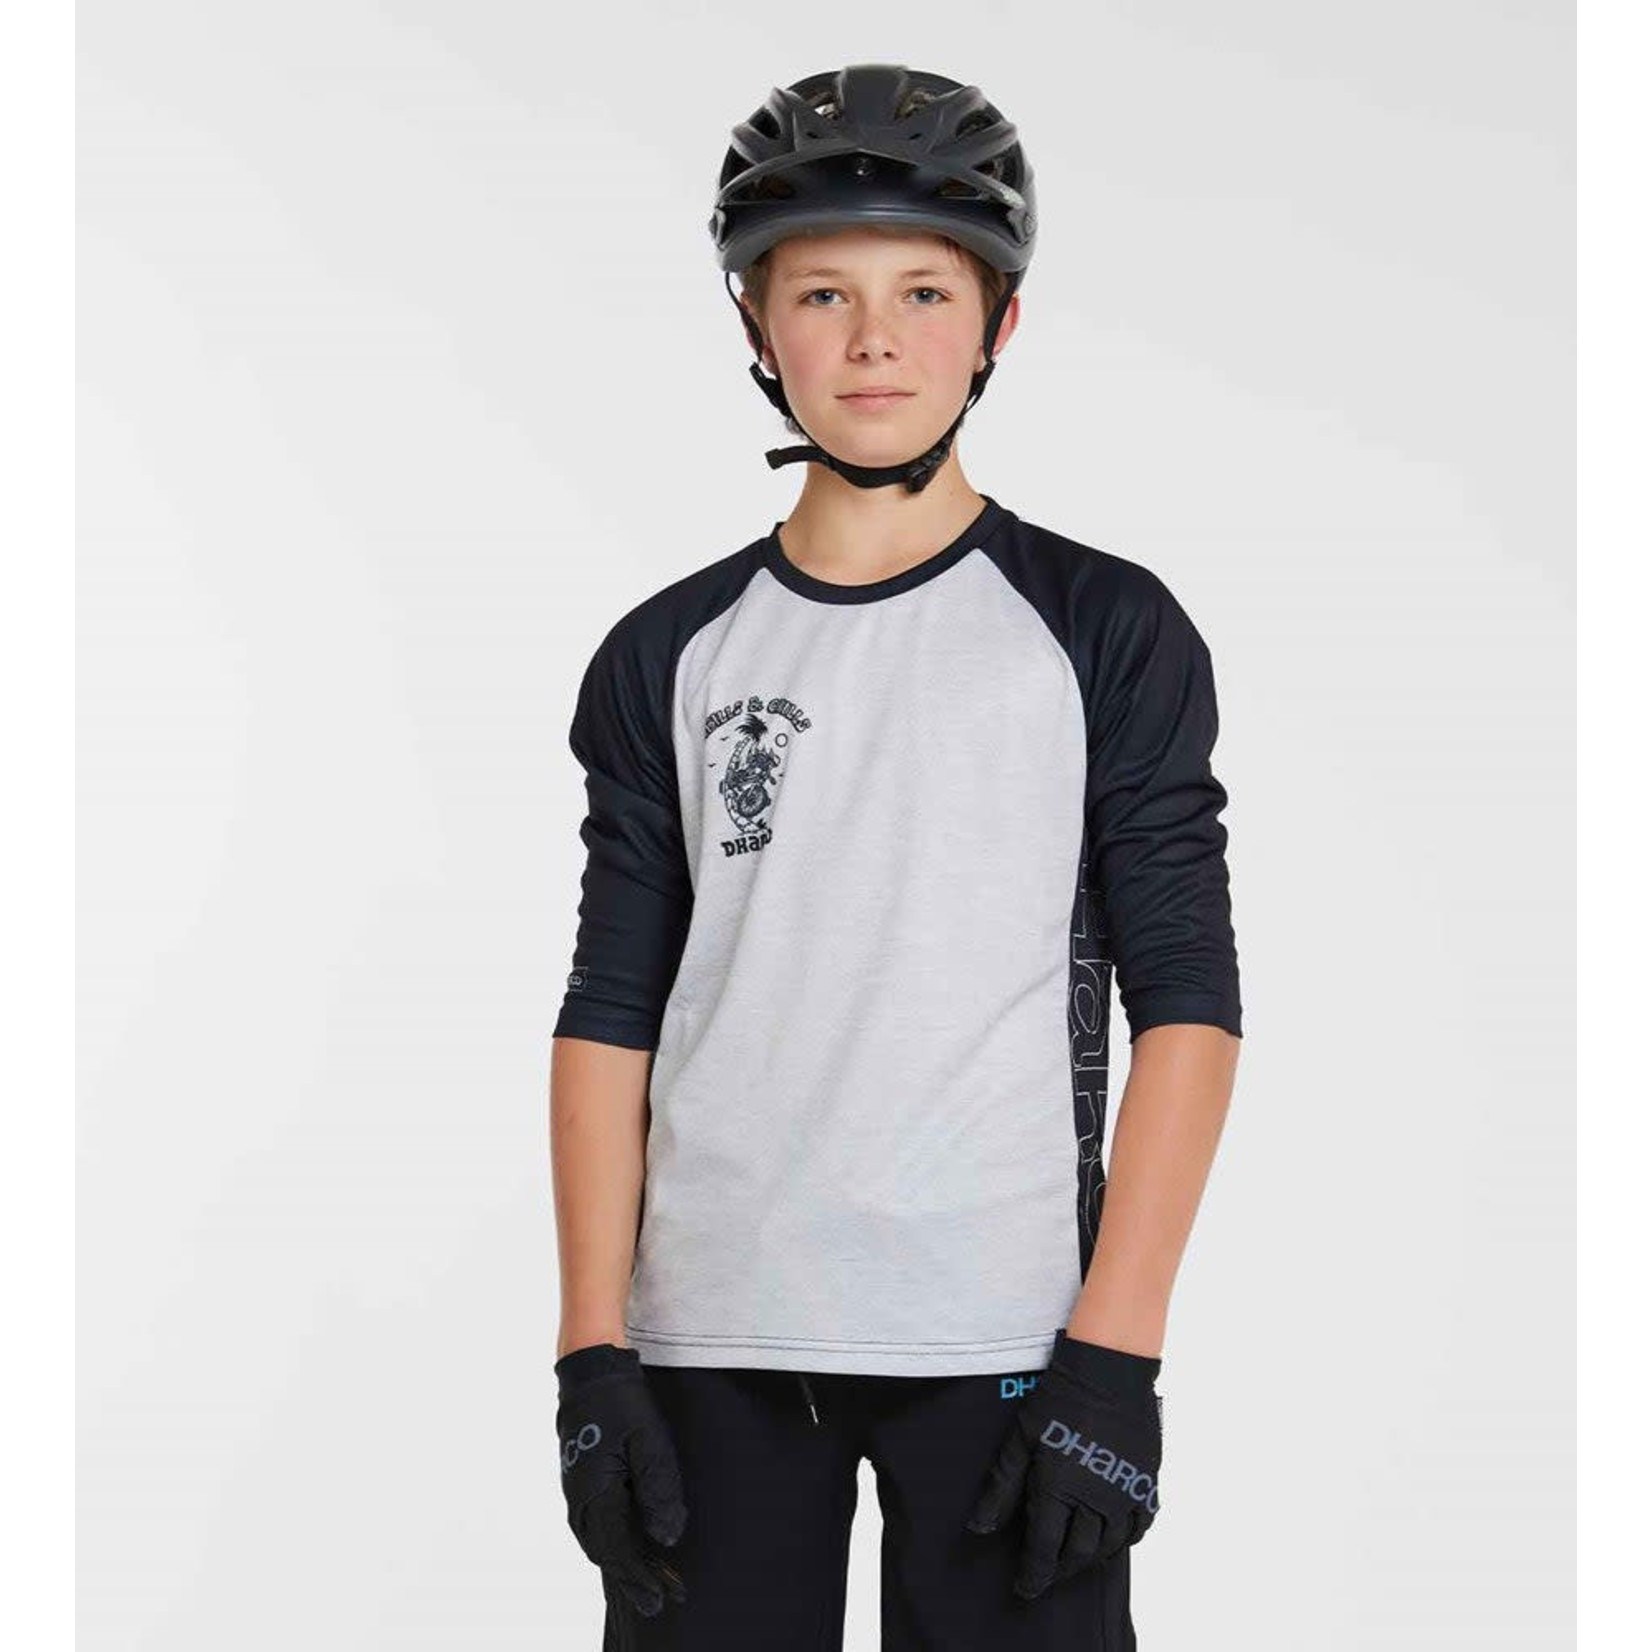 DHARCO DHARCO YOUTH 3/4 SLEEVE JERSEY